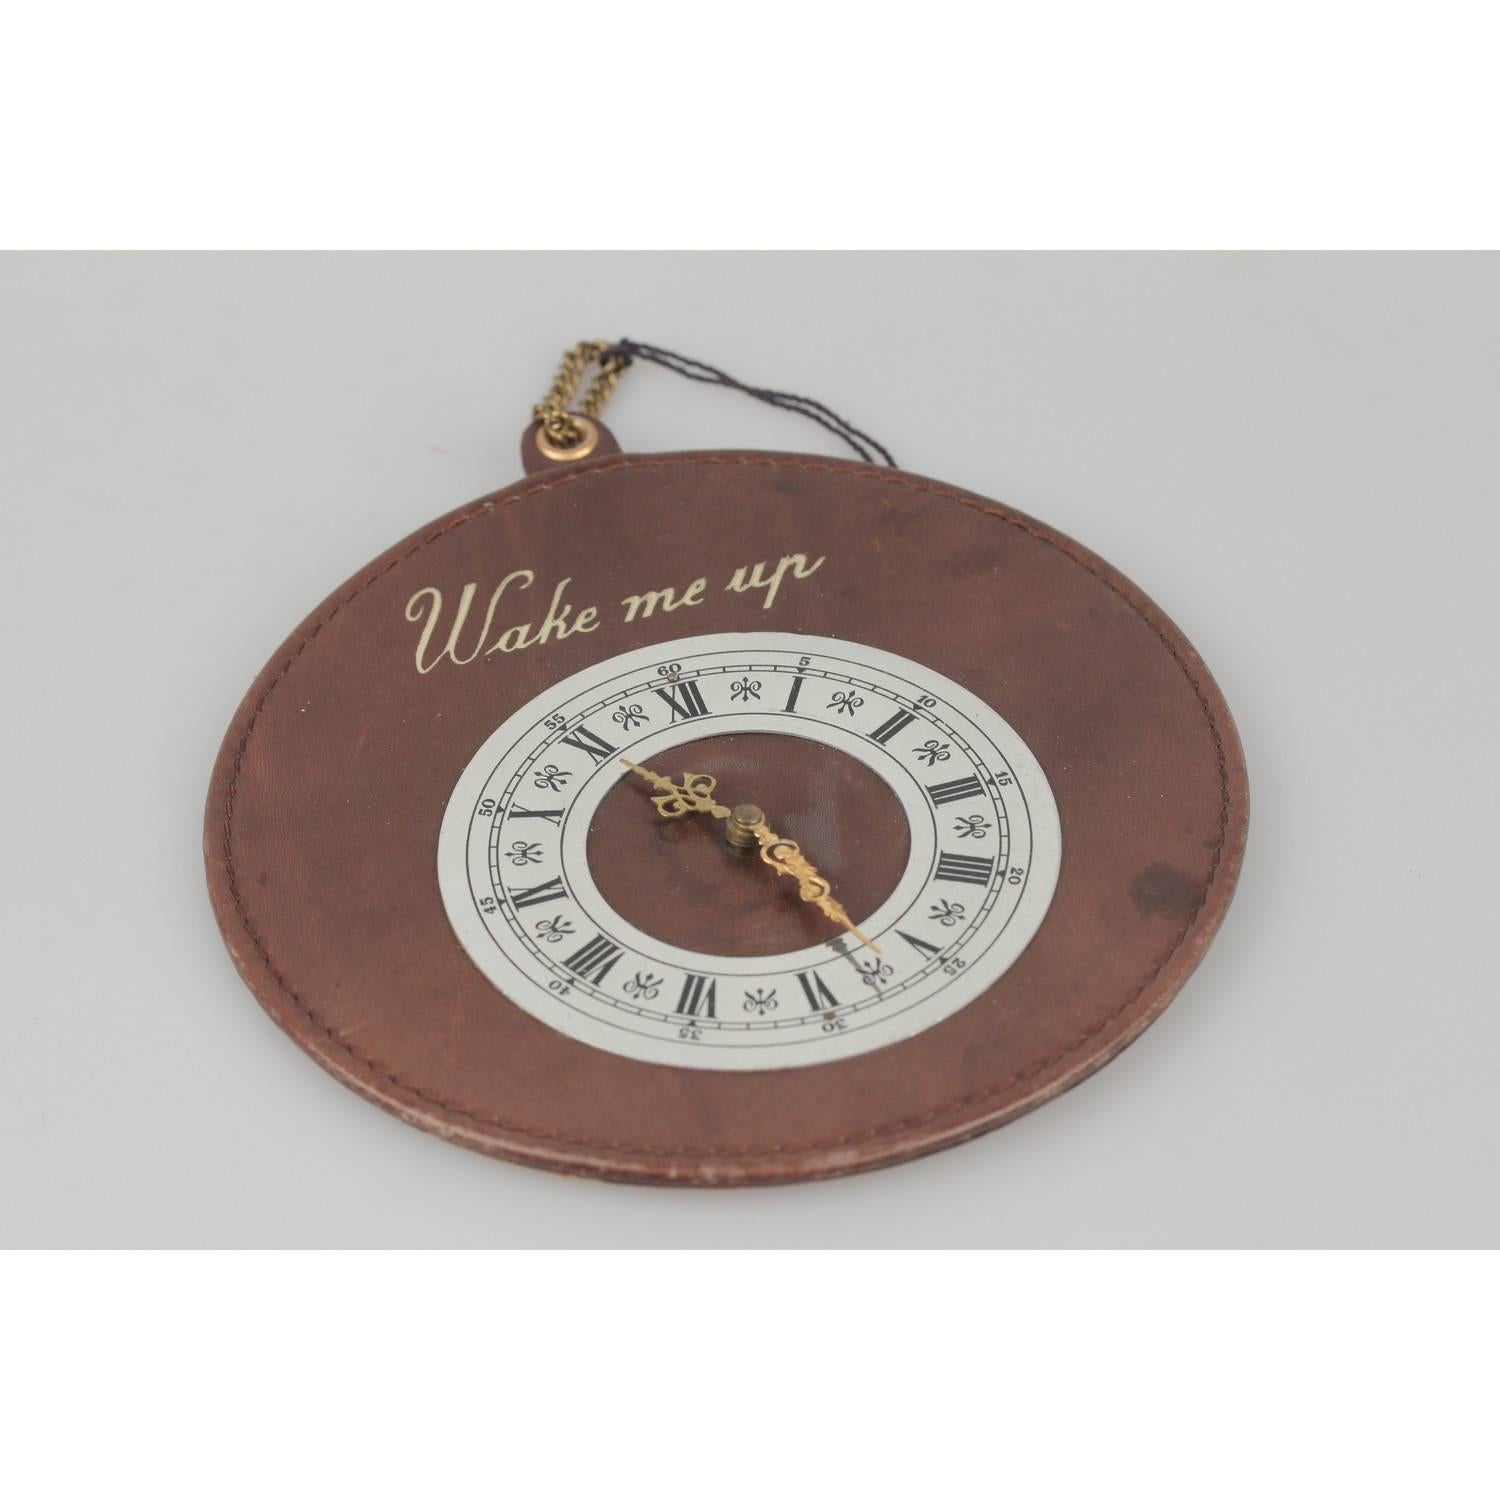 - Rare GUCCI vintage waking up door sign 
- Brown leather disk with mock clock
- 'Wake me up' writing embossed on the front
- Marked 'Made in Italy by GUCCI' on the back
- Diameter: 5.75 inches - 14,6 cm